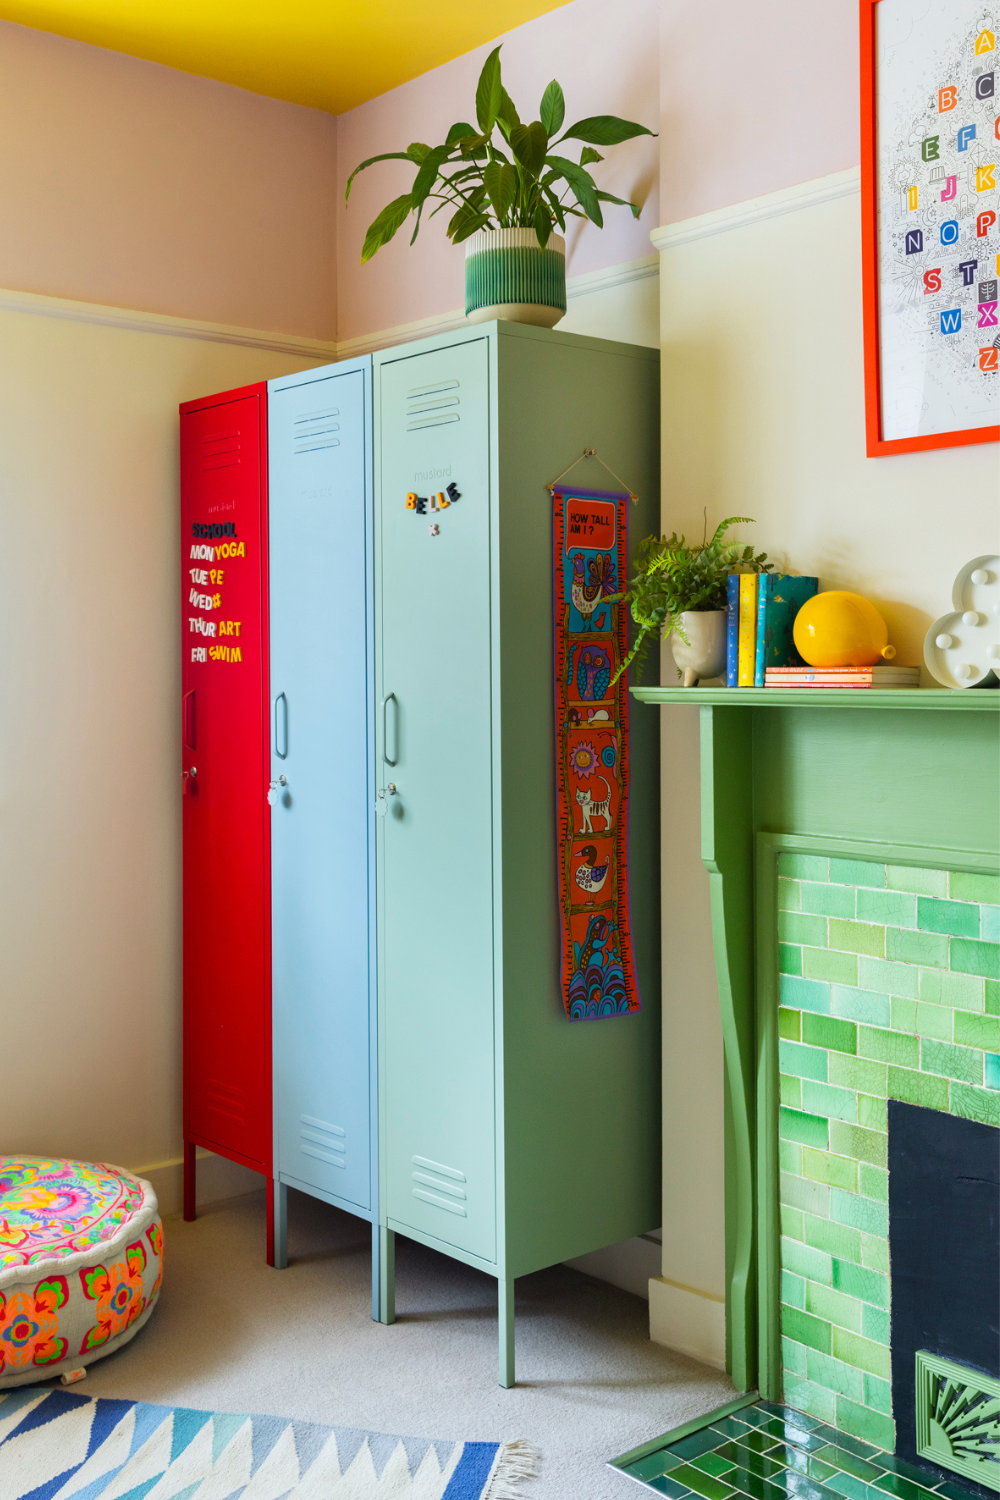 Three Skinny lockers in Poppy, Ocean and Sage are decorated with wordbits magnets spelling out 'Belle' and an activity schedule.